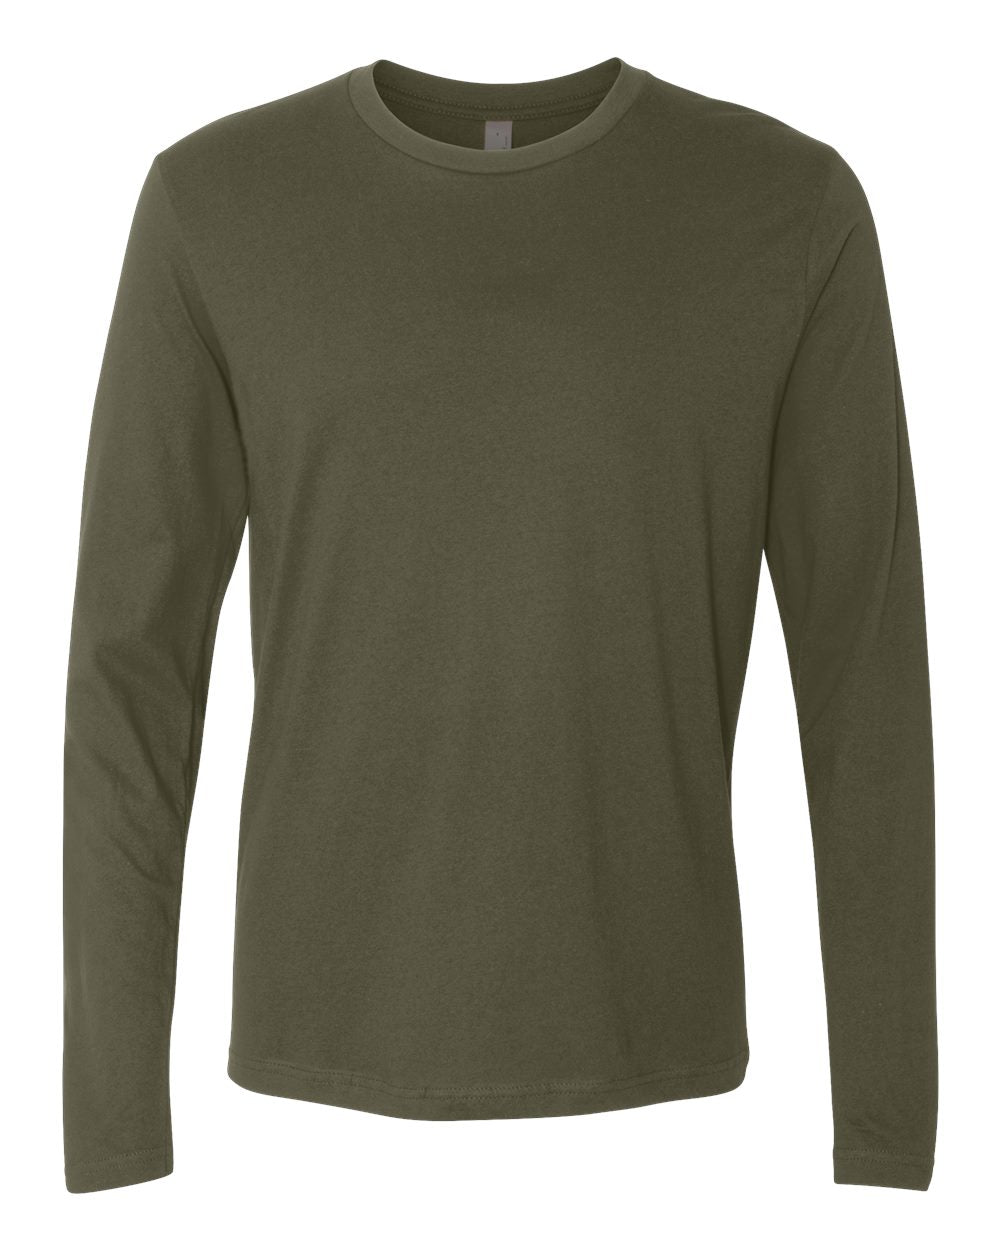 Next Level Long Sleeve (3601) in Military Green